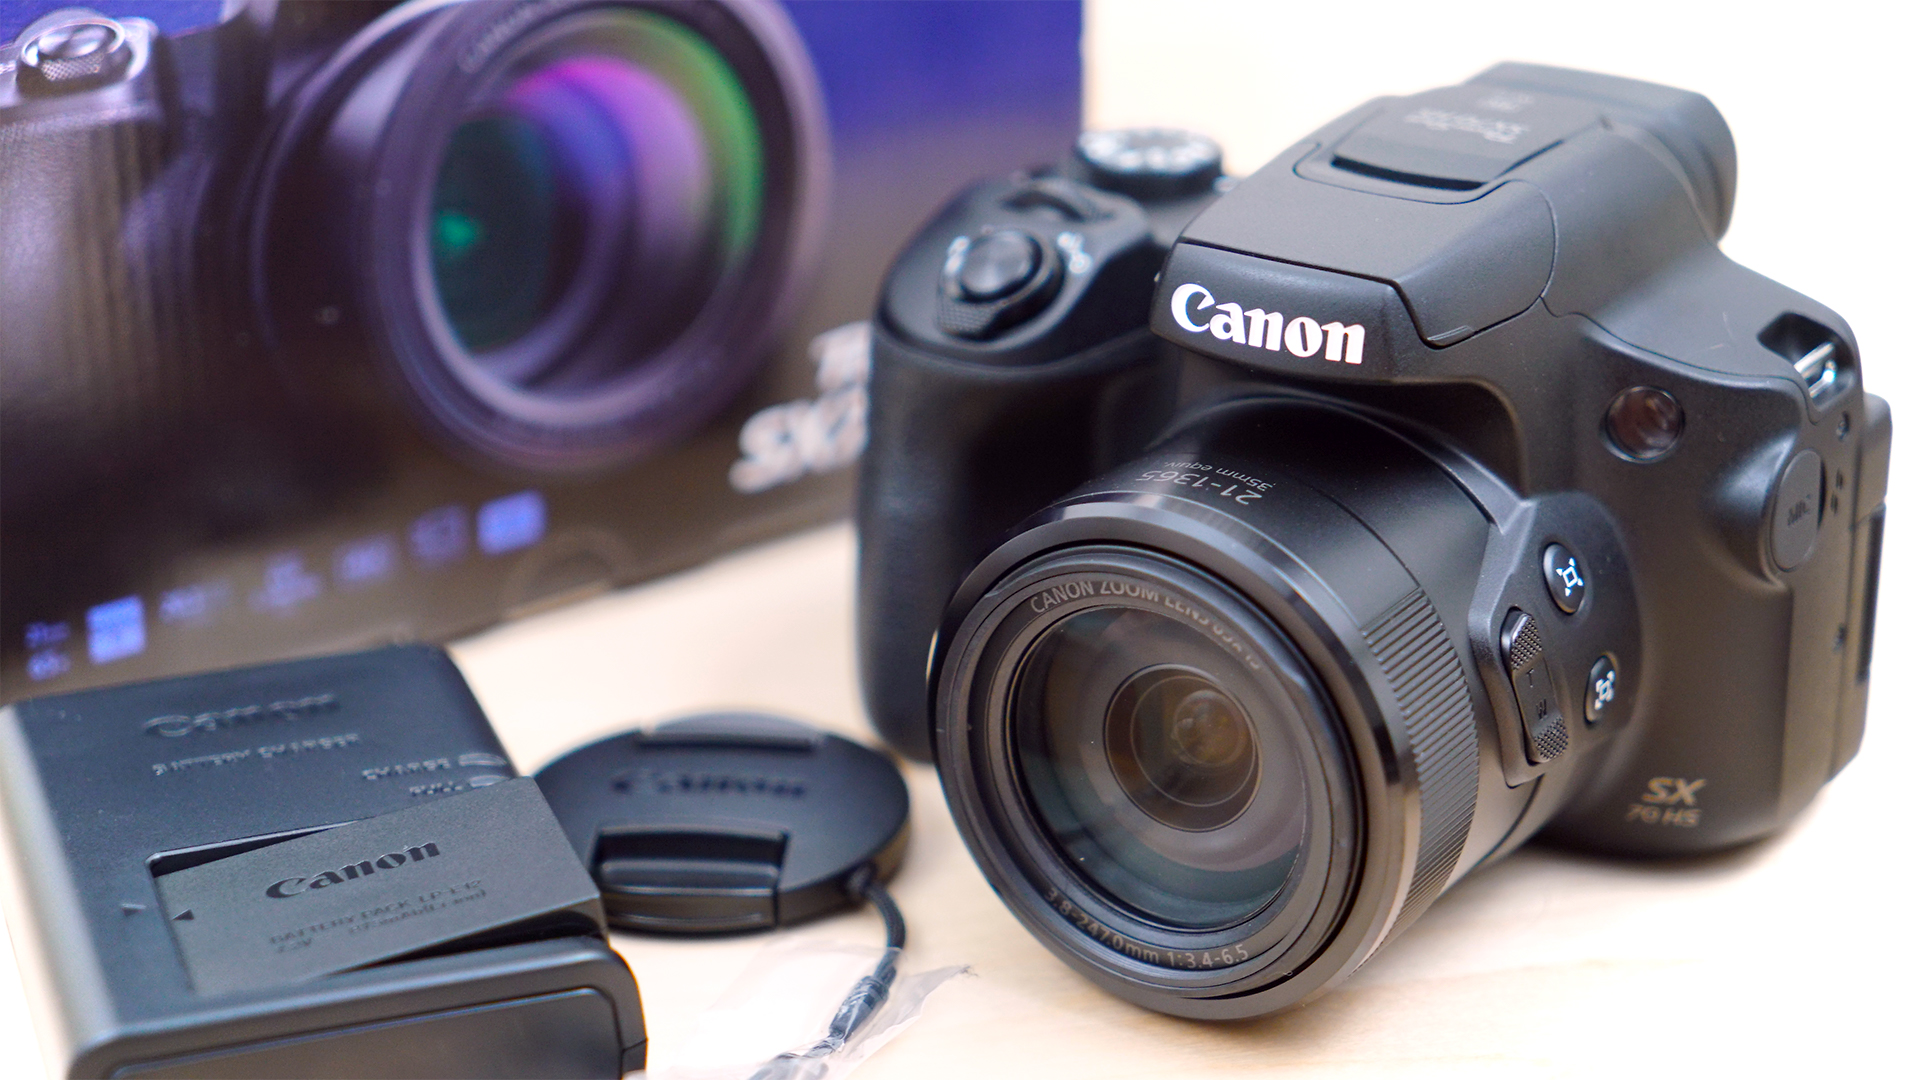 Canon PowerShot SX70 HS Review with Sample Images & Video